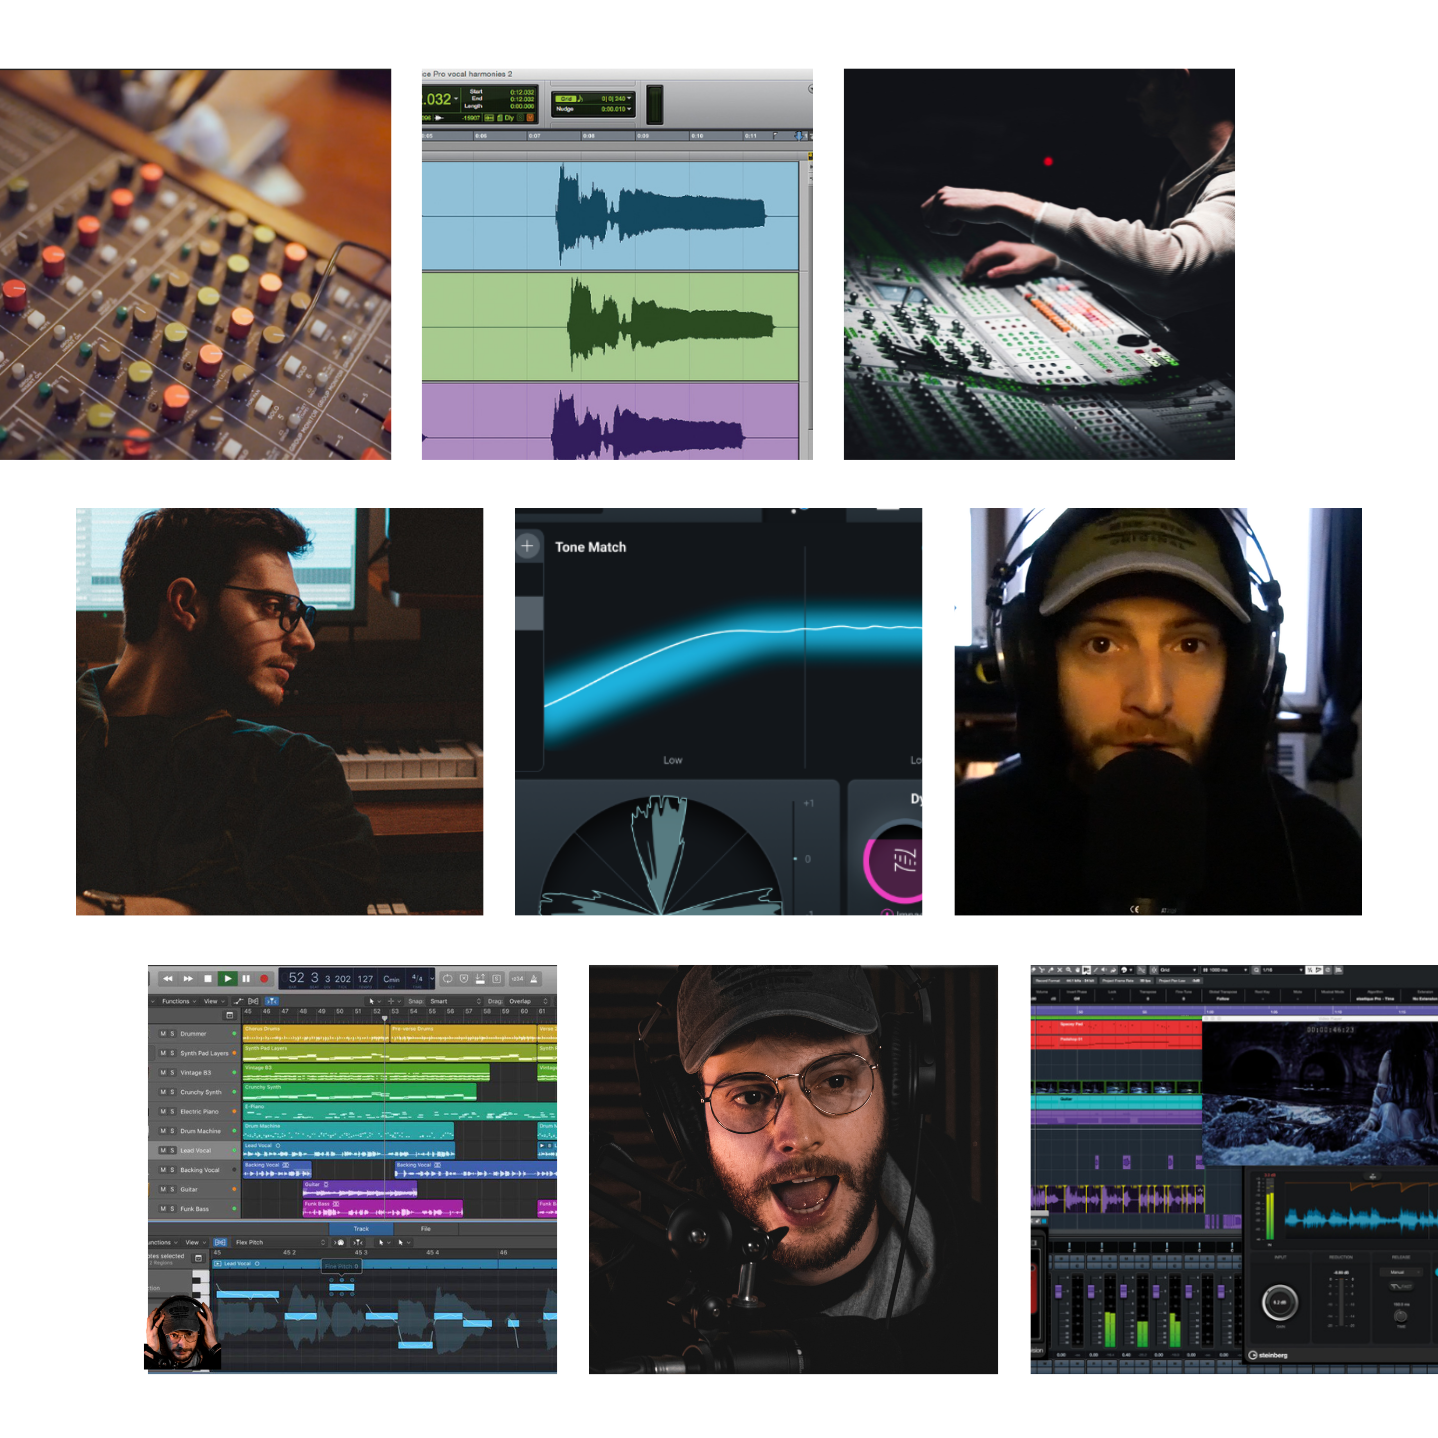 Ultimate Music Production Course